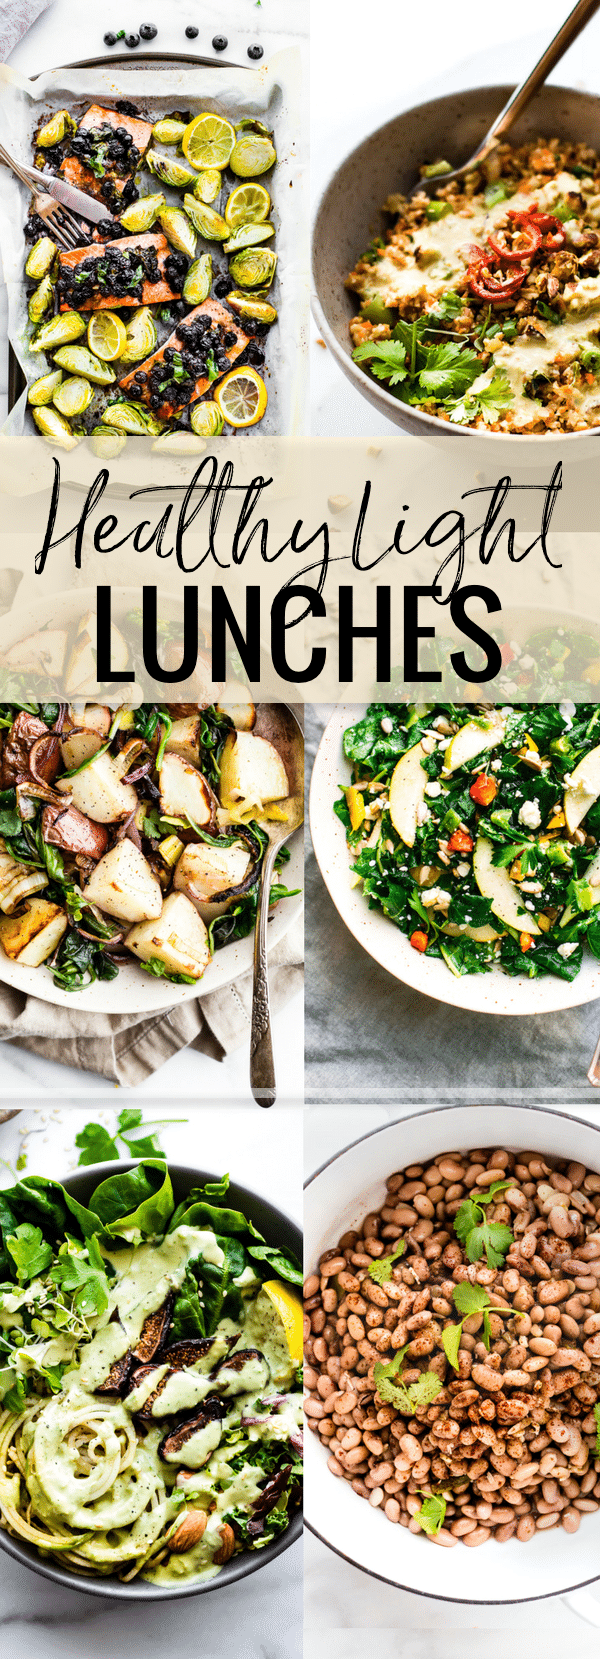 Healthy light lunch recipes with seasonal vegetables, fresh fish, and healthy greens means these recipes are super quick and easy to make, too. all gluten-free with a few paleo/vegetarian options too! www.cottercrunch.com